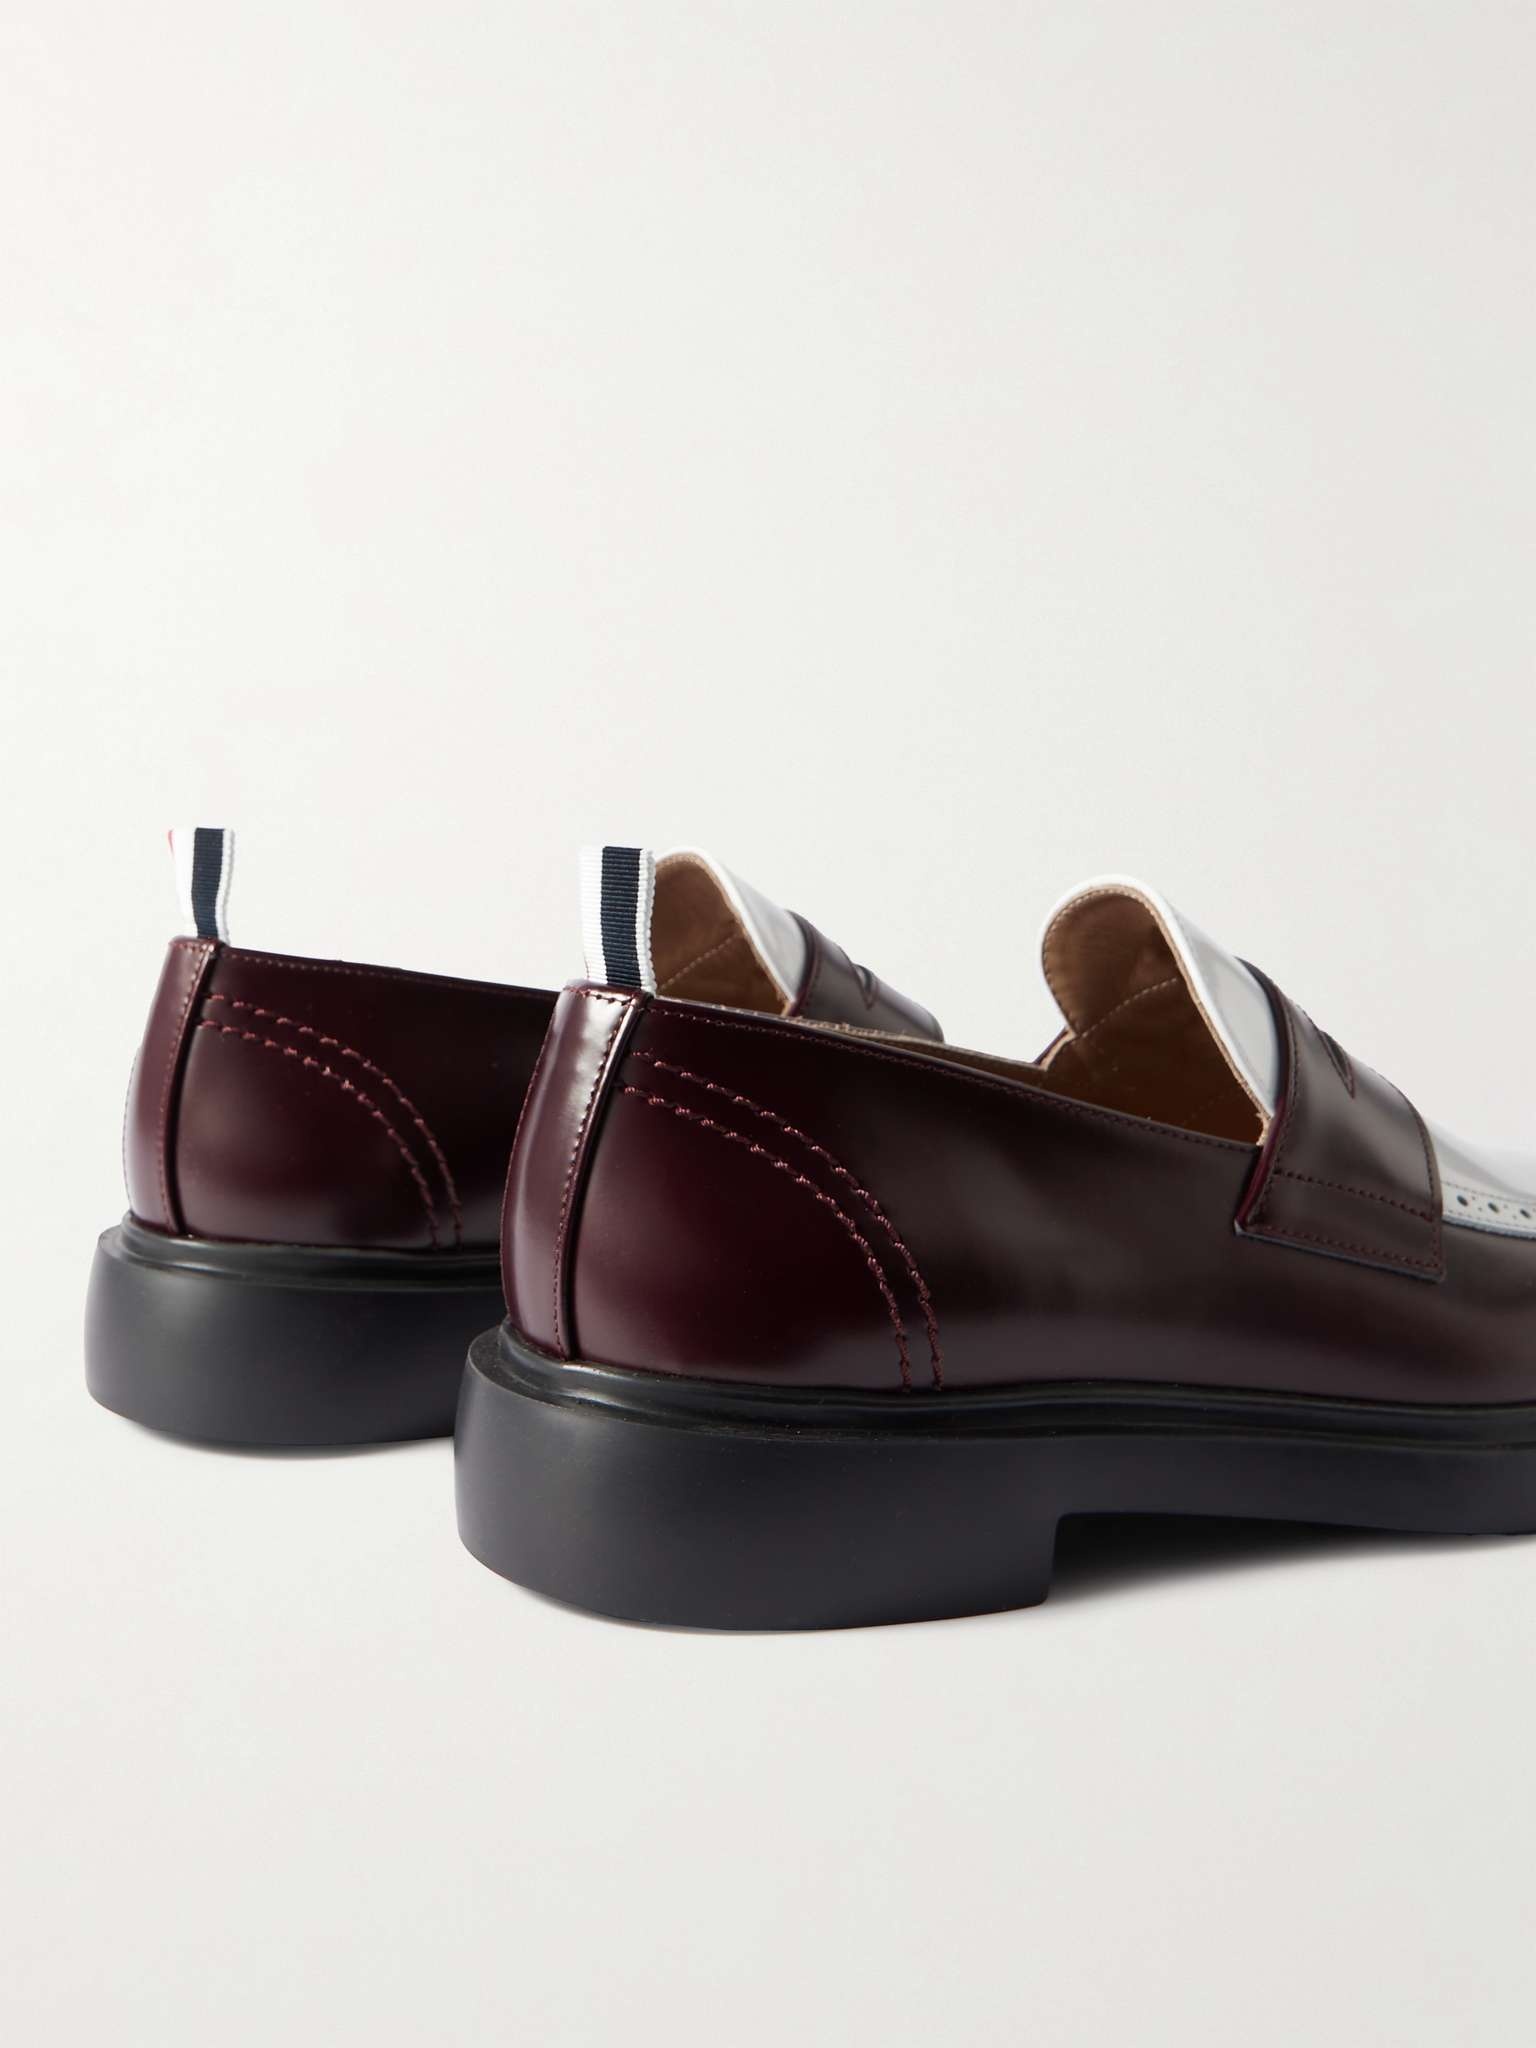 Two-Tone Leather Penny Loafers - 5